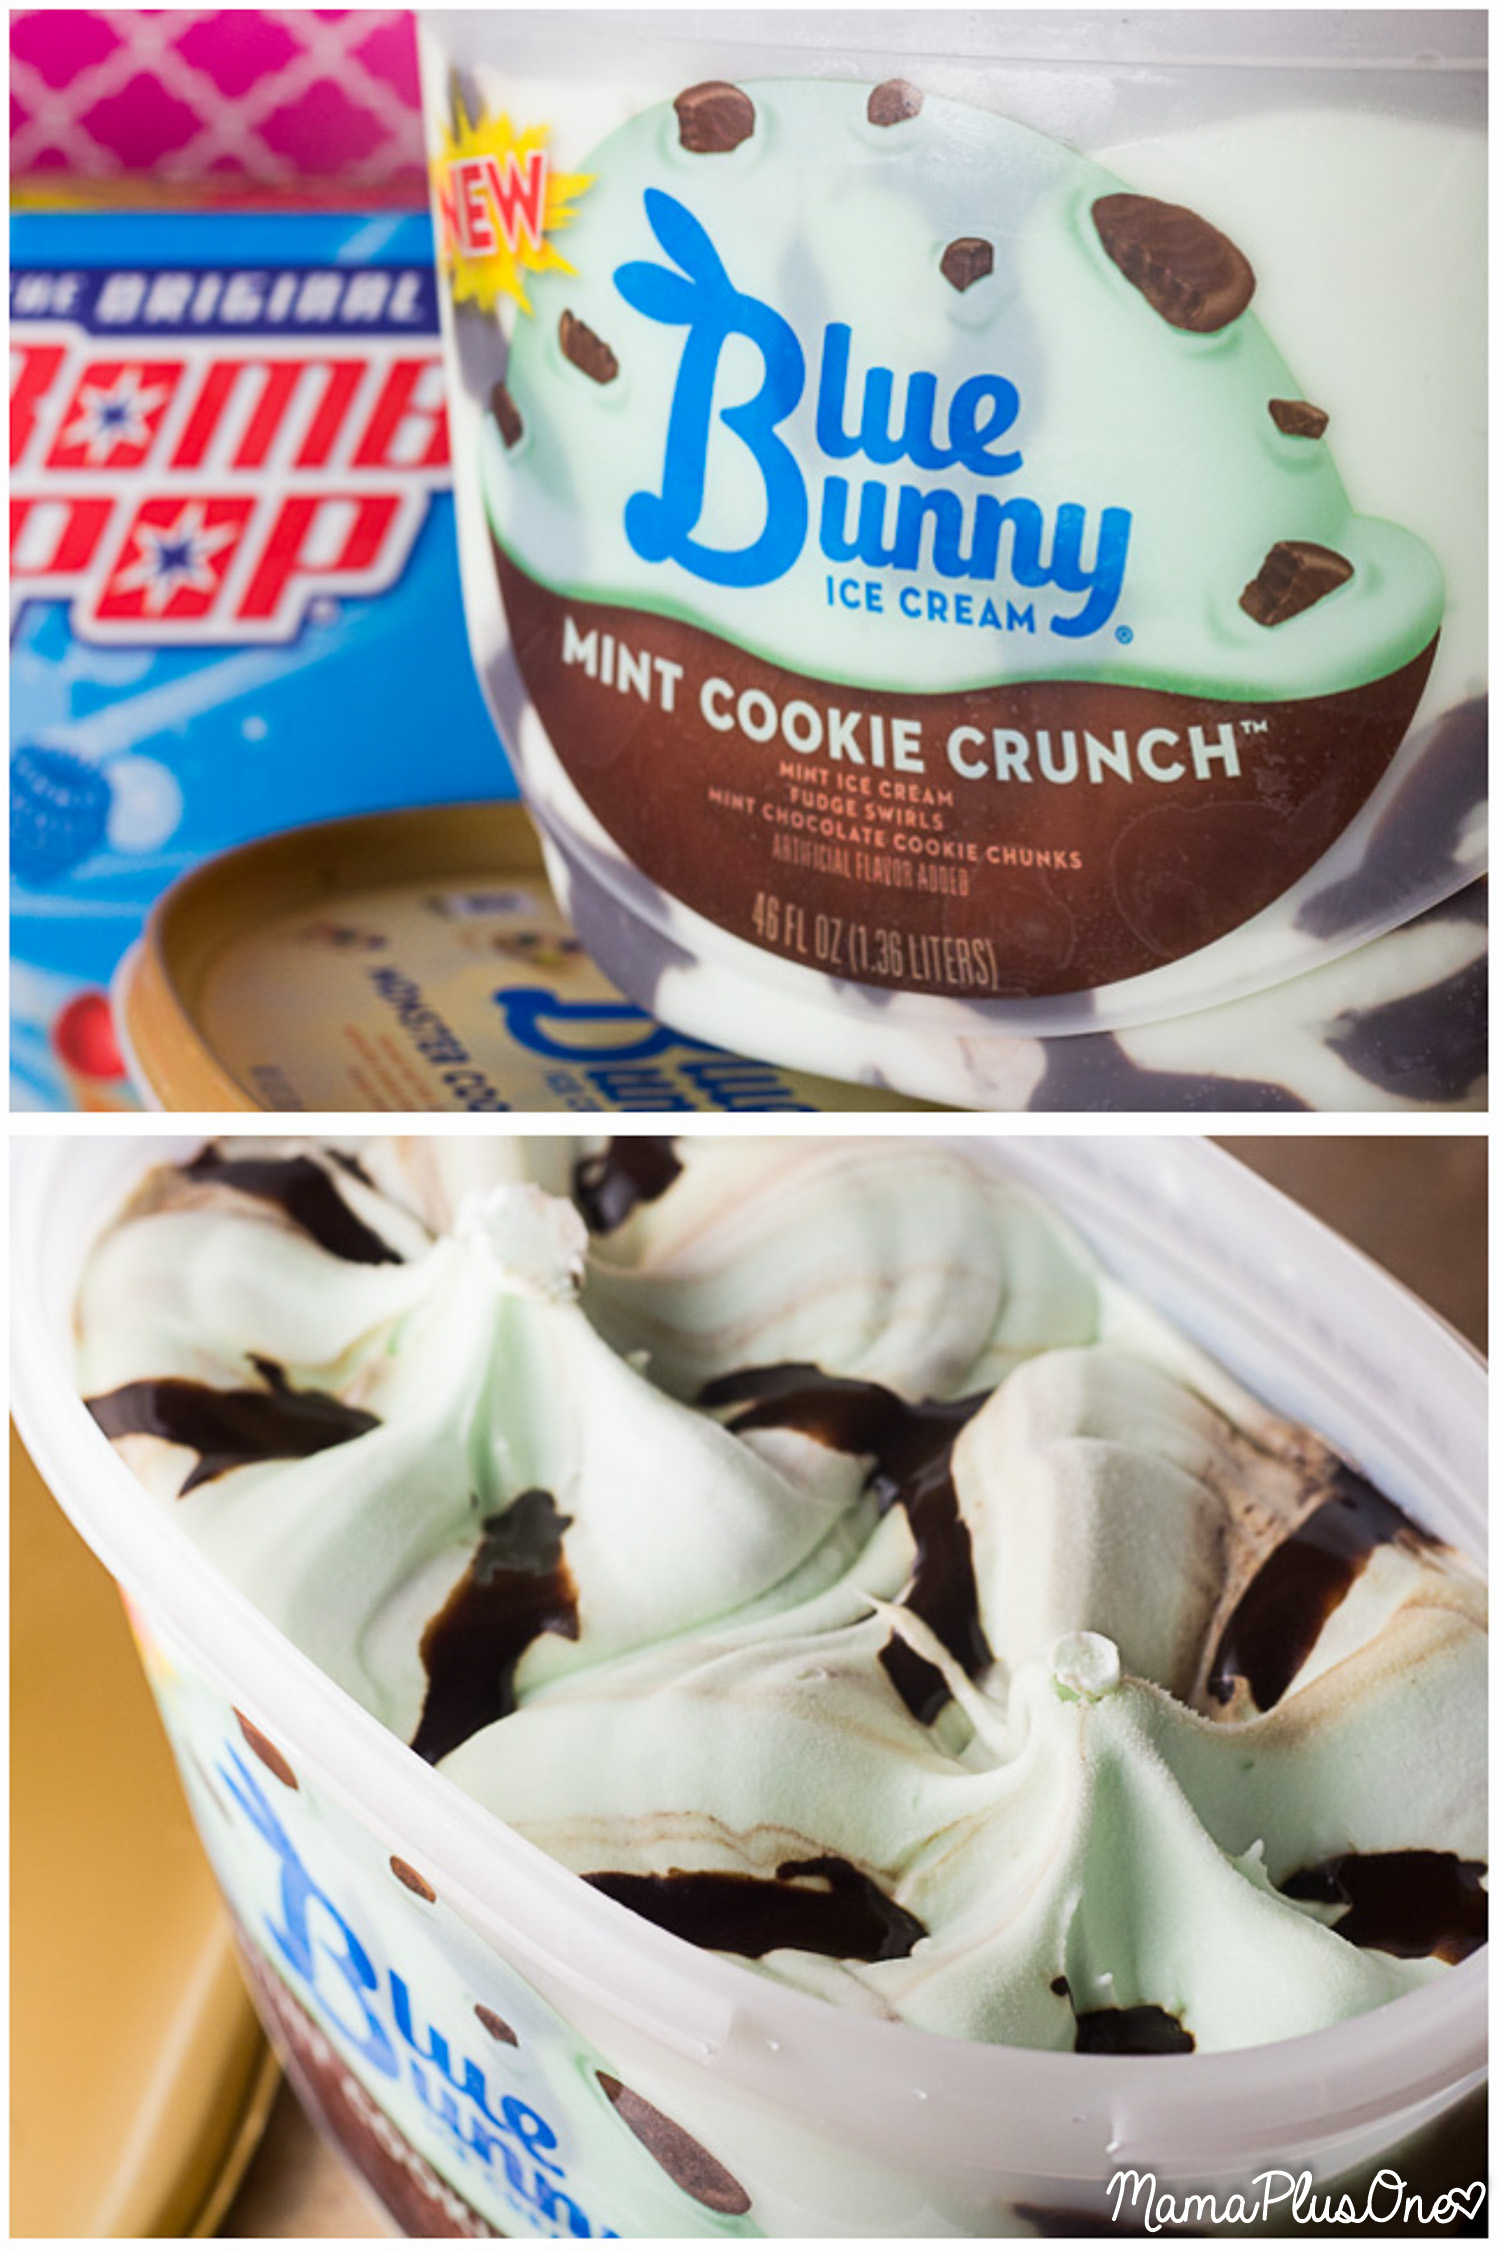 Fried Ice Cream can get messy... so here's all the fried ice cream flavor without the hassle of frying it! This unfried ice cream is easy to make, perfect for summer, and can be made with all of your favorite Blue Bunny ice cream flavors! #SoHoppinGood #BlueBunny #BombPop [ad]